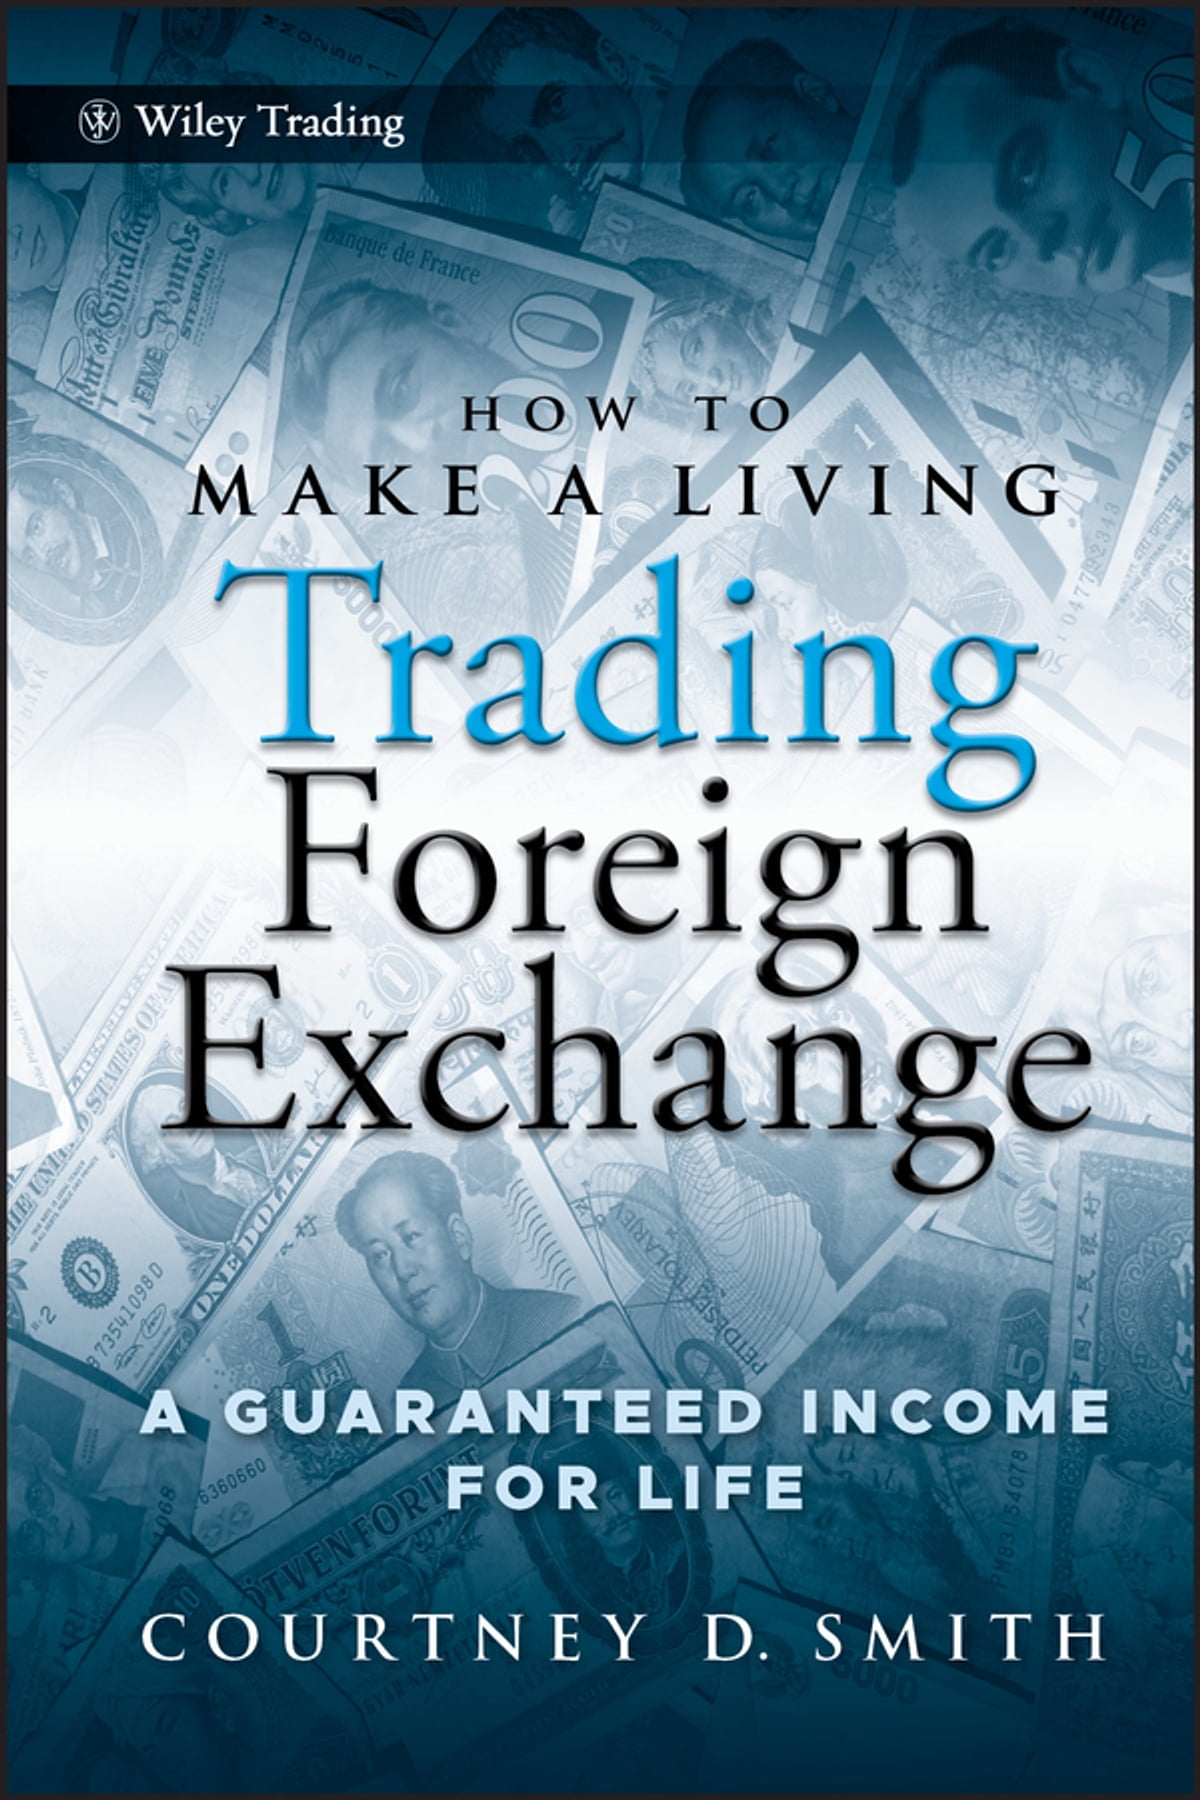 Courtney Smith - How to Make a Living Trading Foreign Exchange